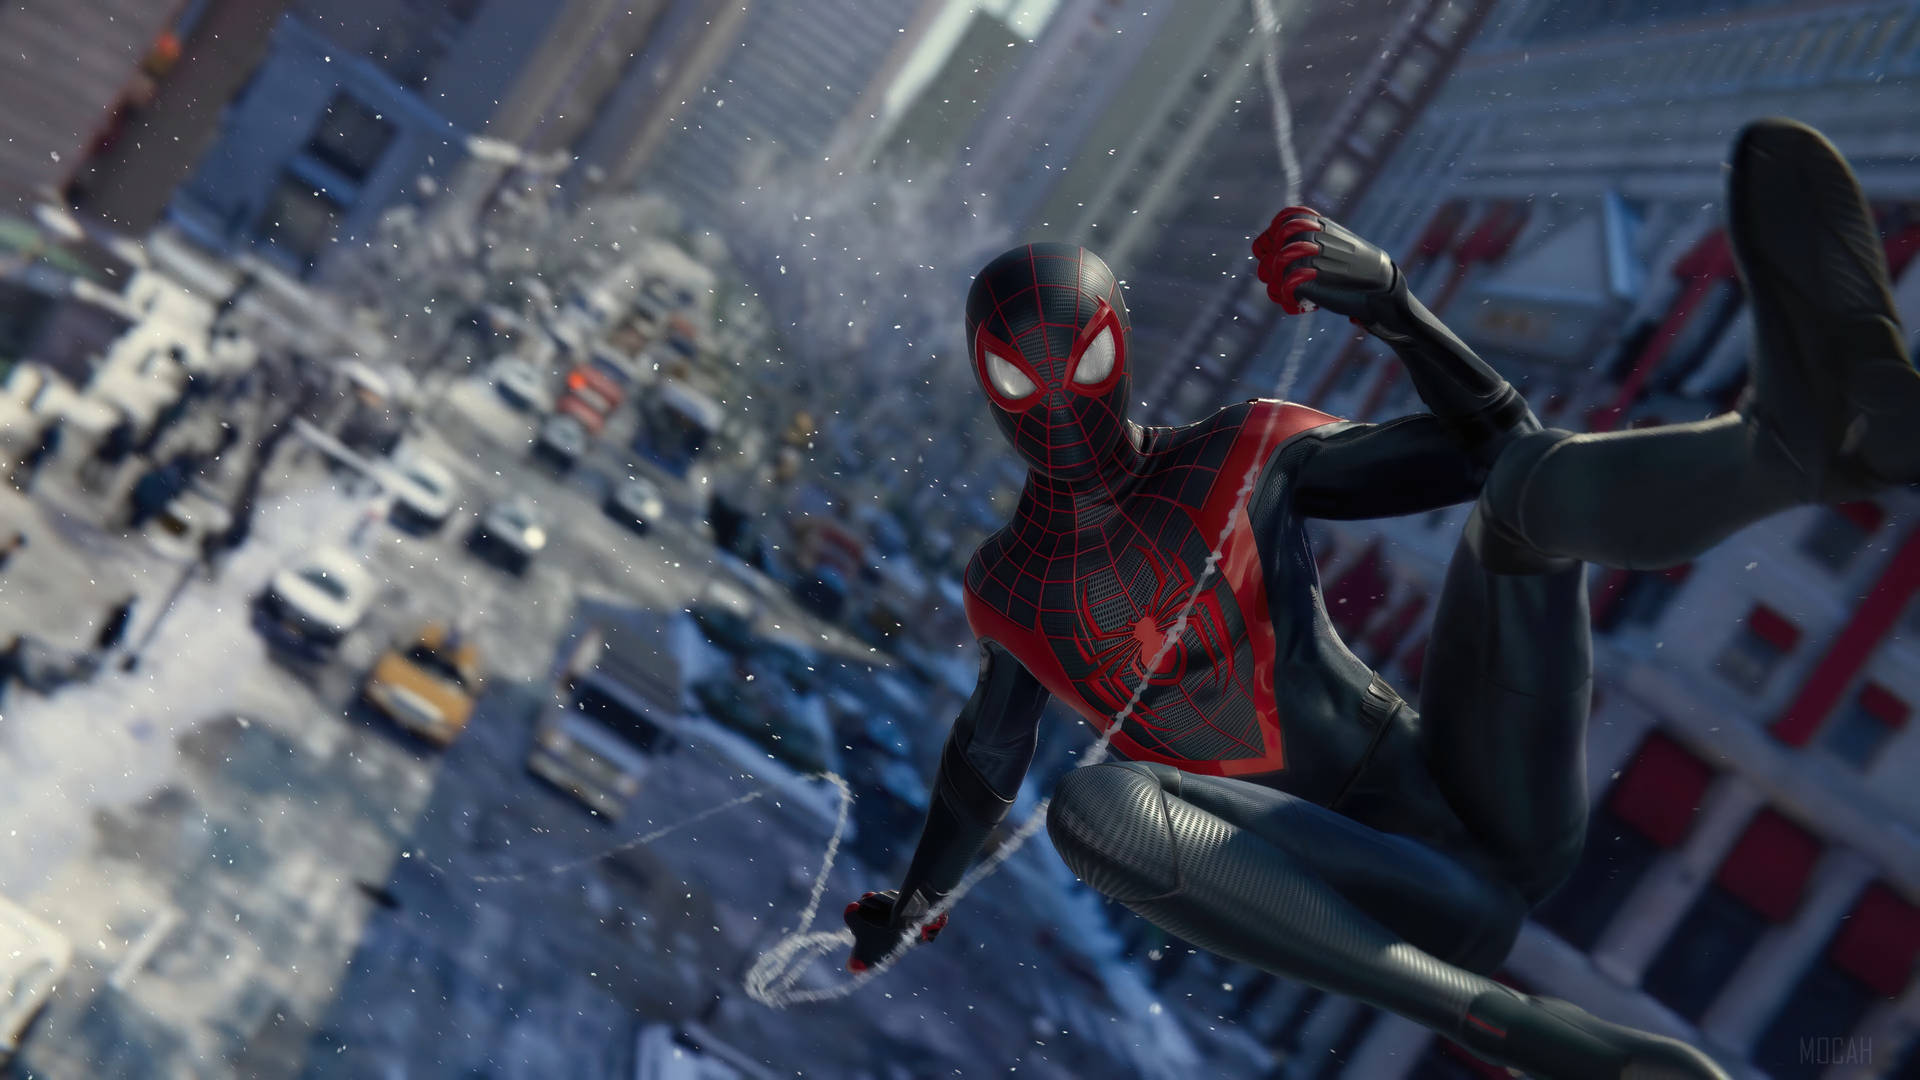 "Experience the thrilling new world of Spider-Man Miles Morales on the PS5!" Wallpaper